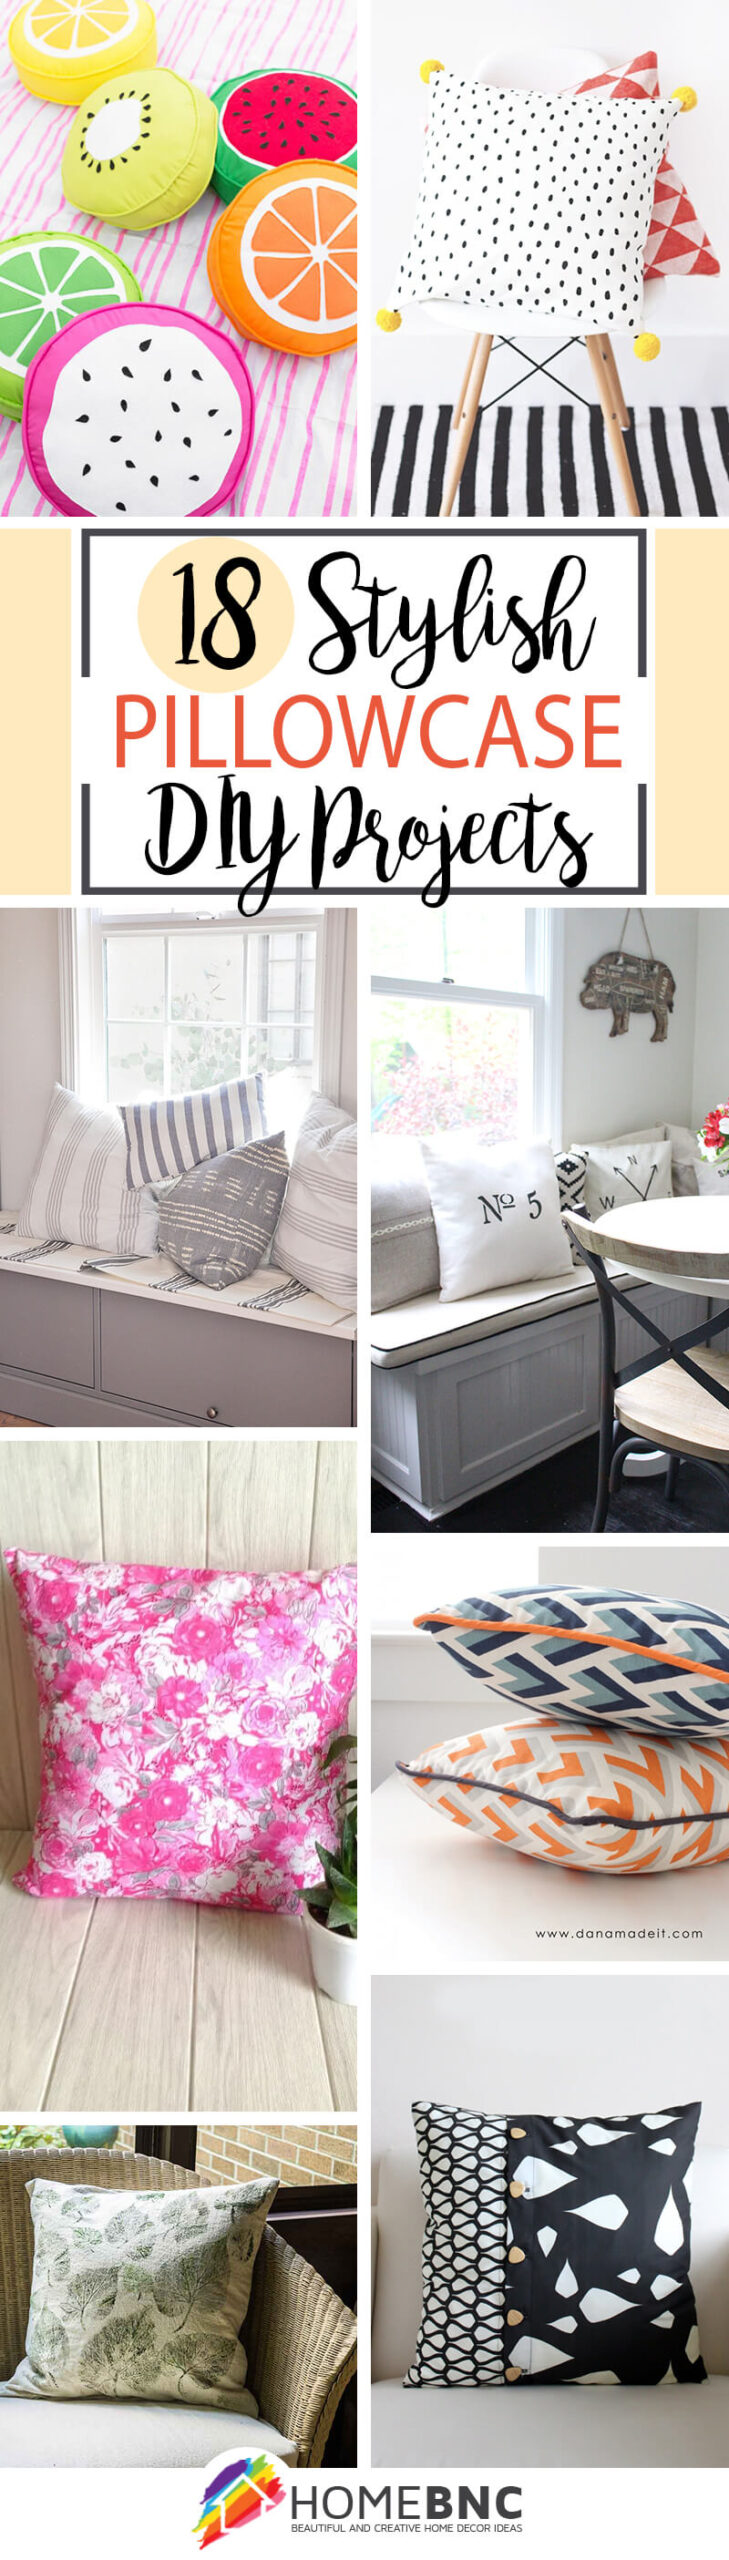 Best Pillowcase DIY Projects